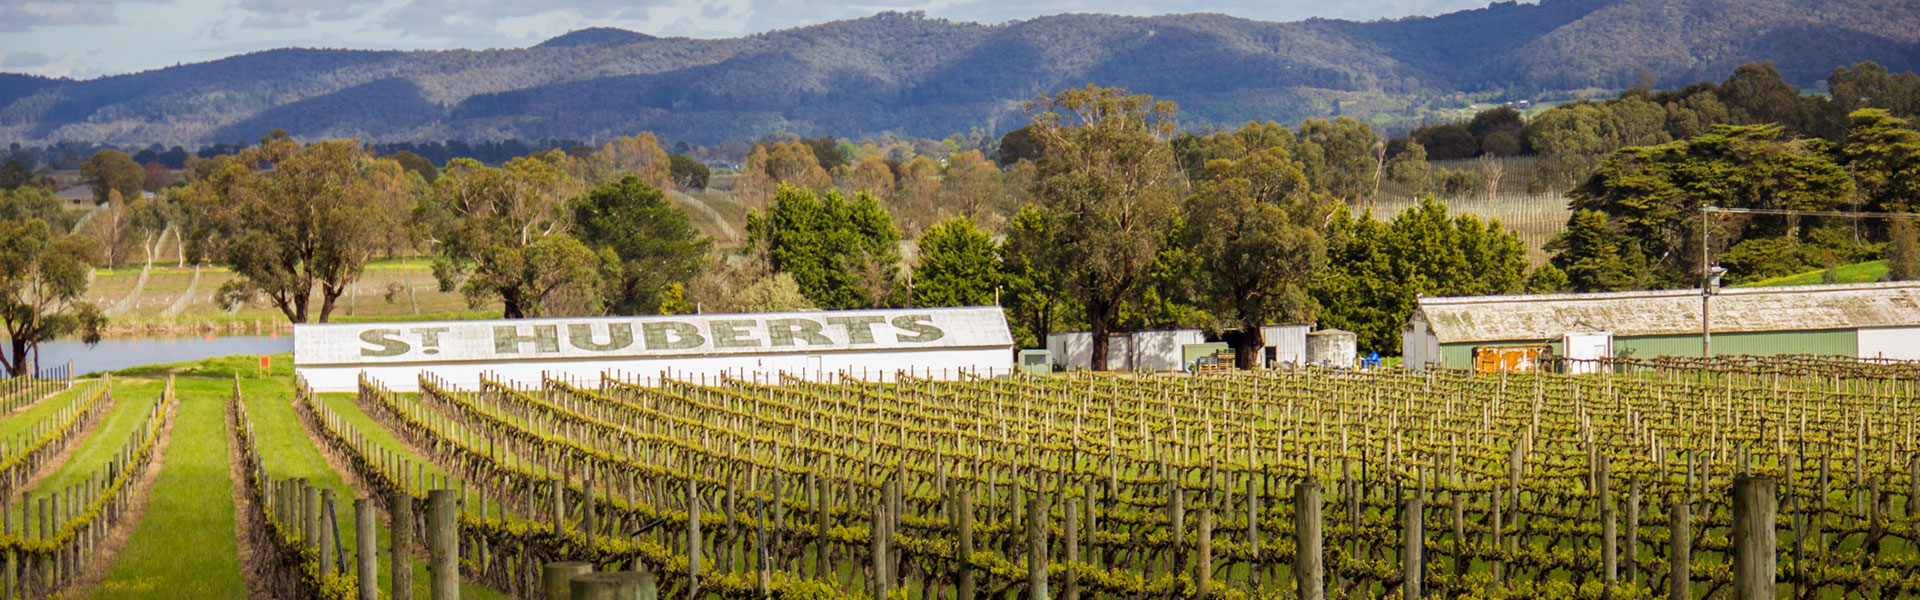 Winery in Focus - St Huberts